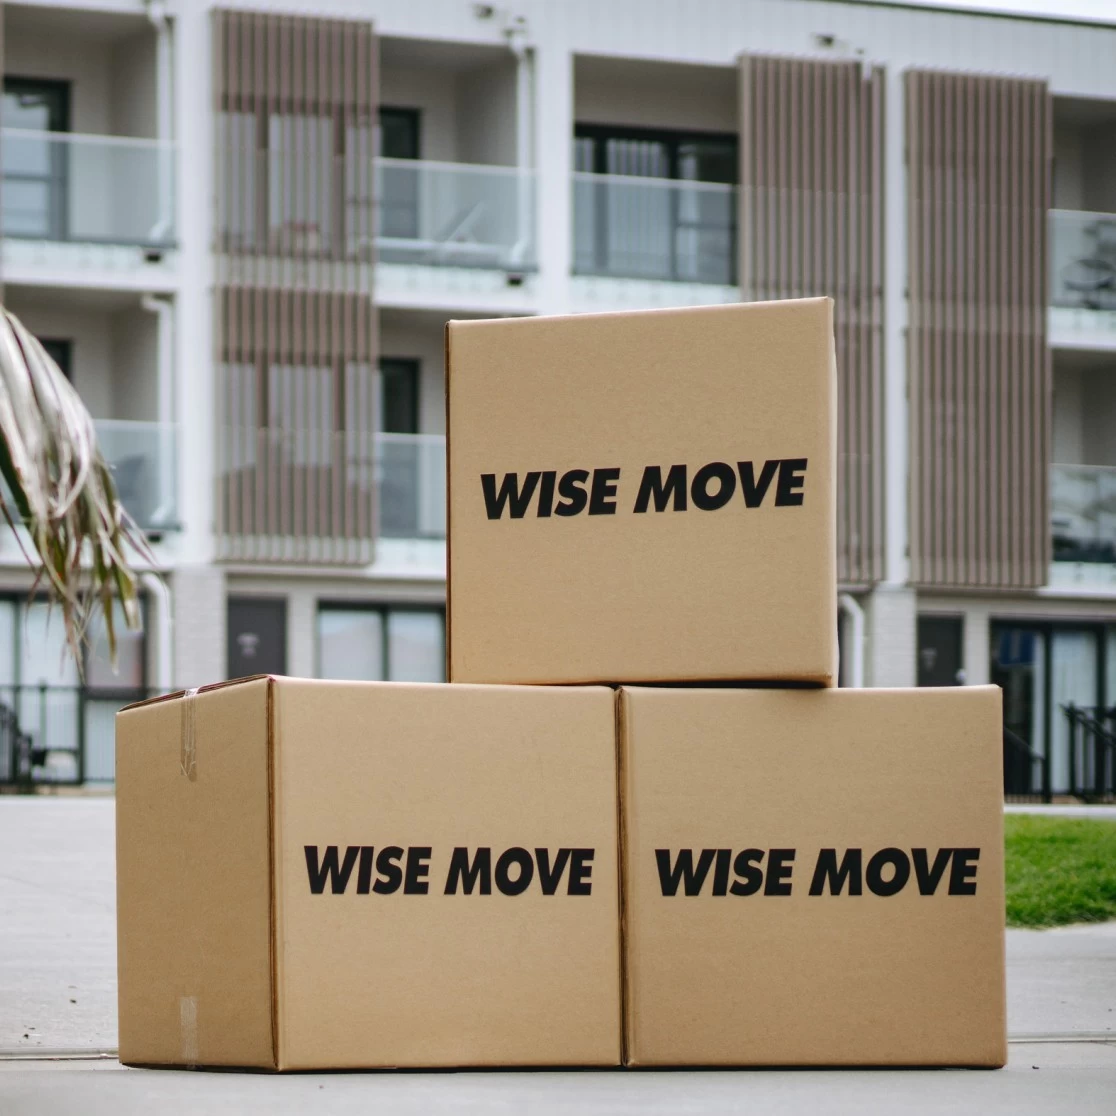 Moving boxes stacked outside a residential complex